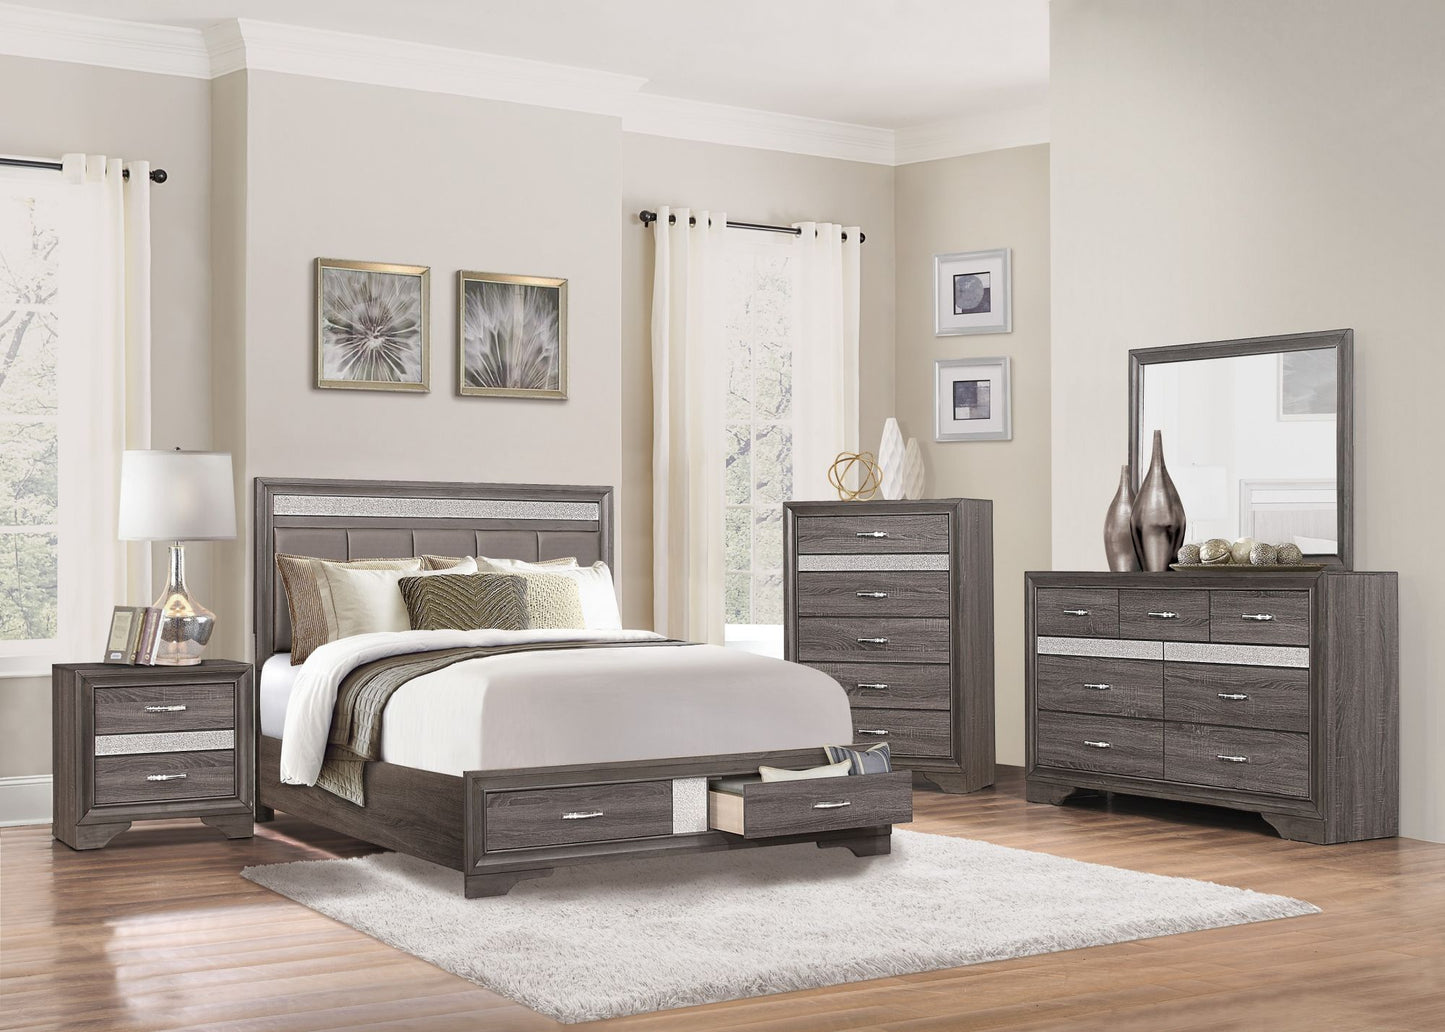 unique style bedroom 1pc dresser of drawers hidden drawers gray and sliver glitter wooden furniture